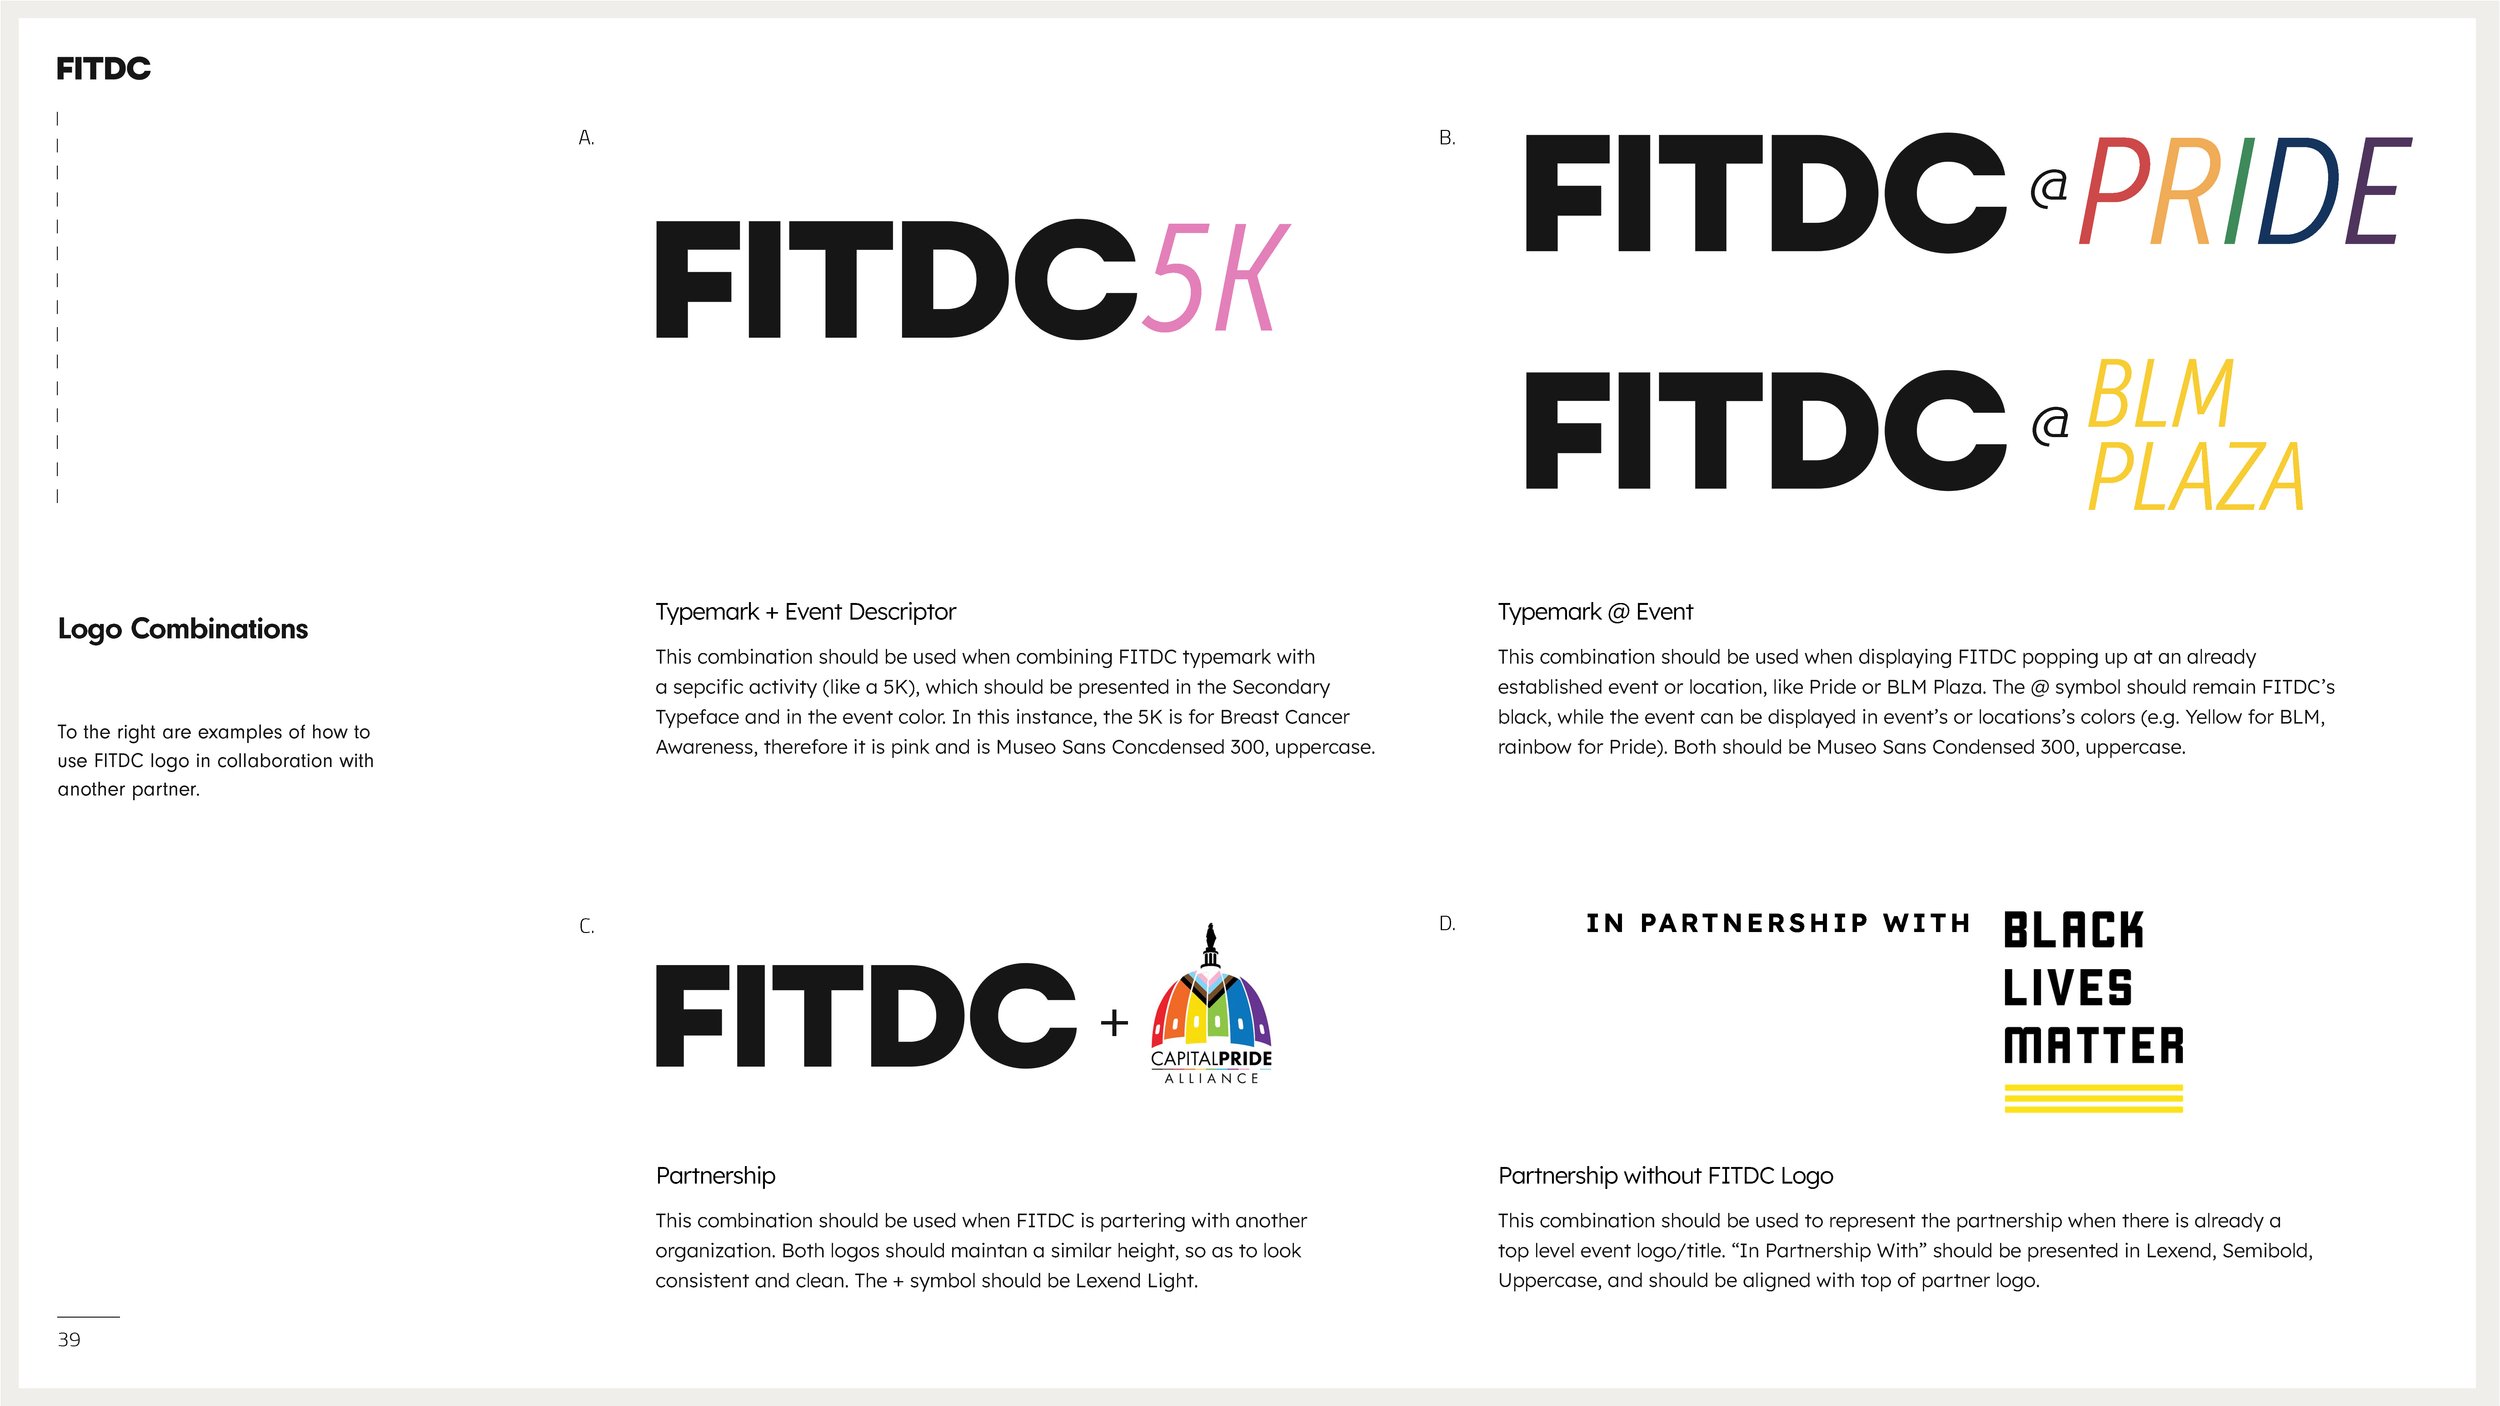 FITDC_Brand Guidelines_3.7_Page_39.jpg